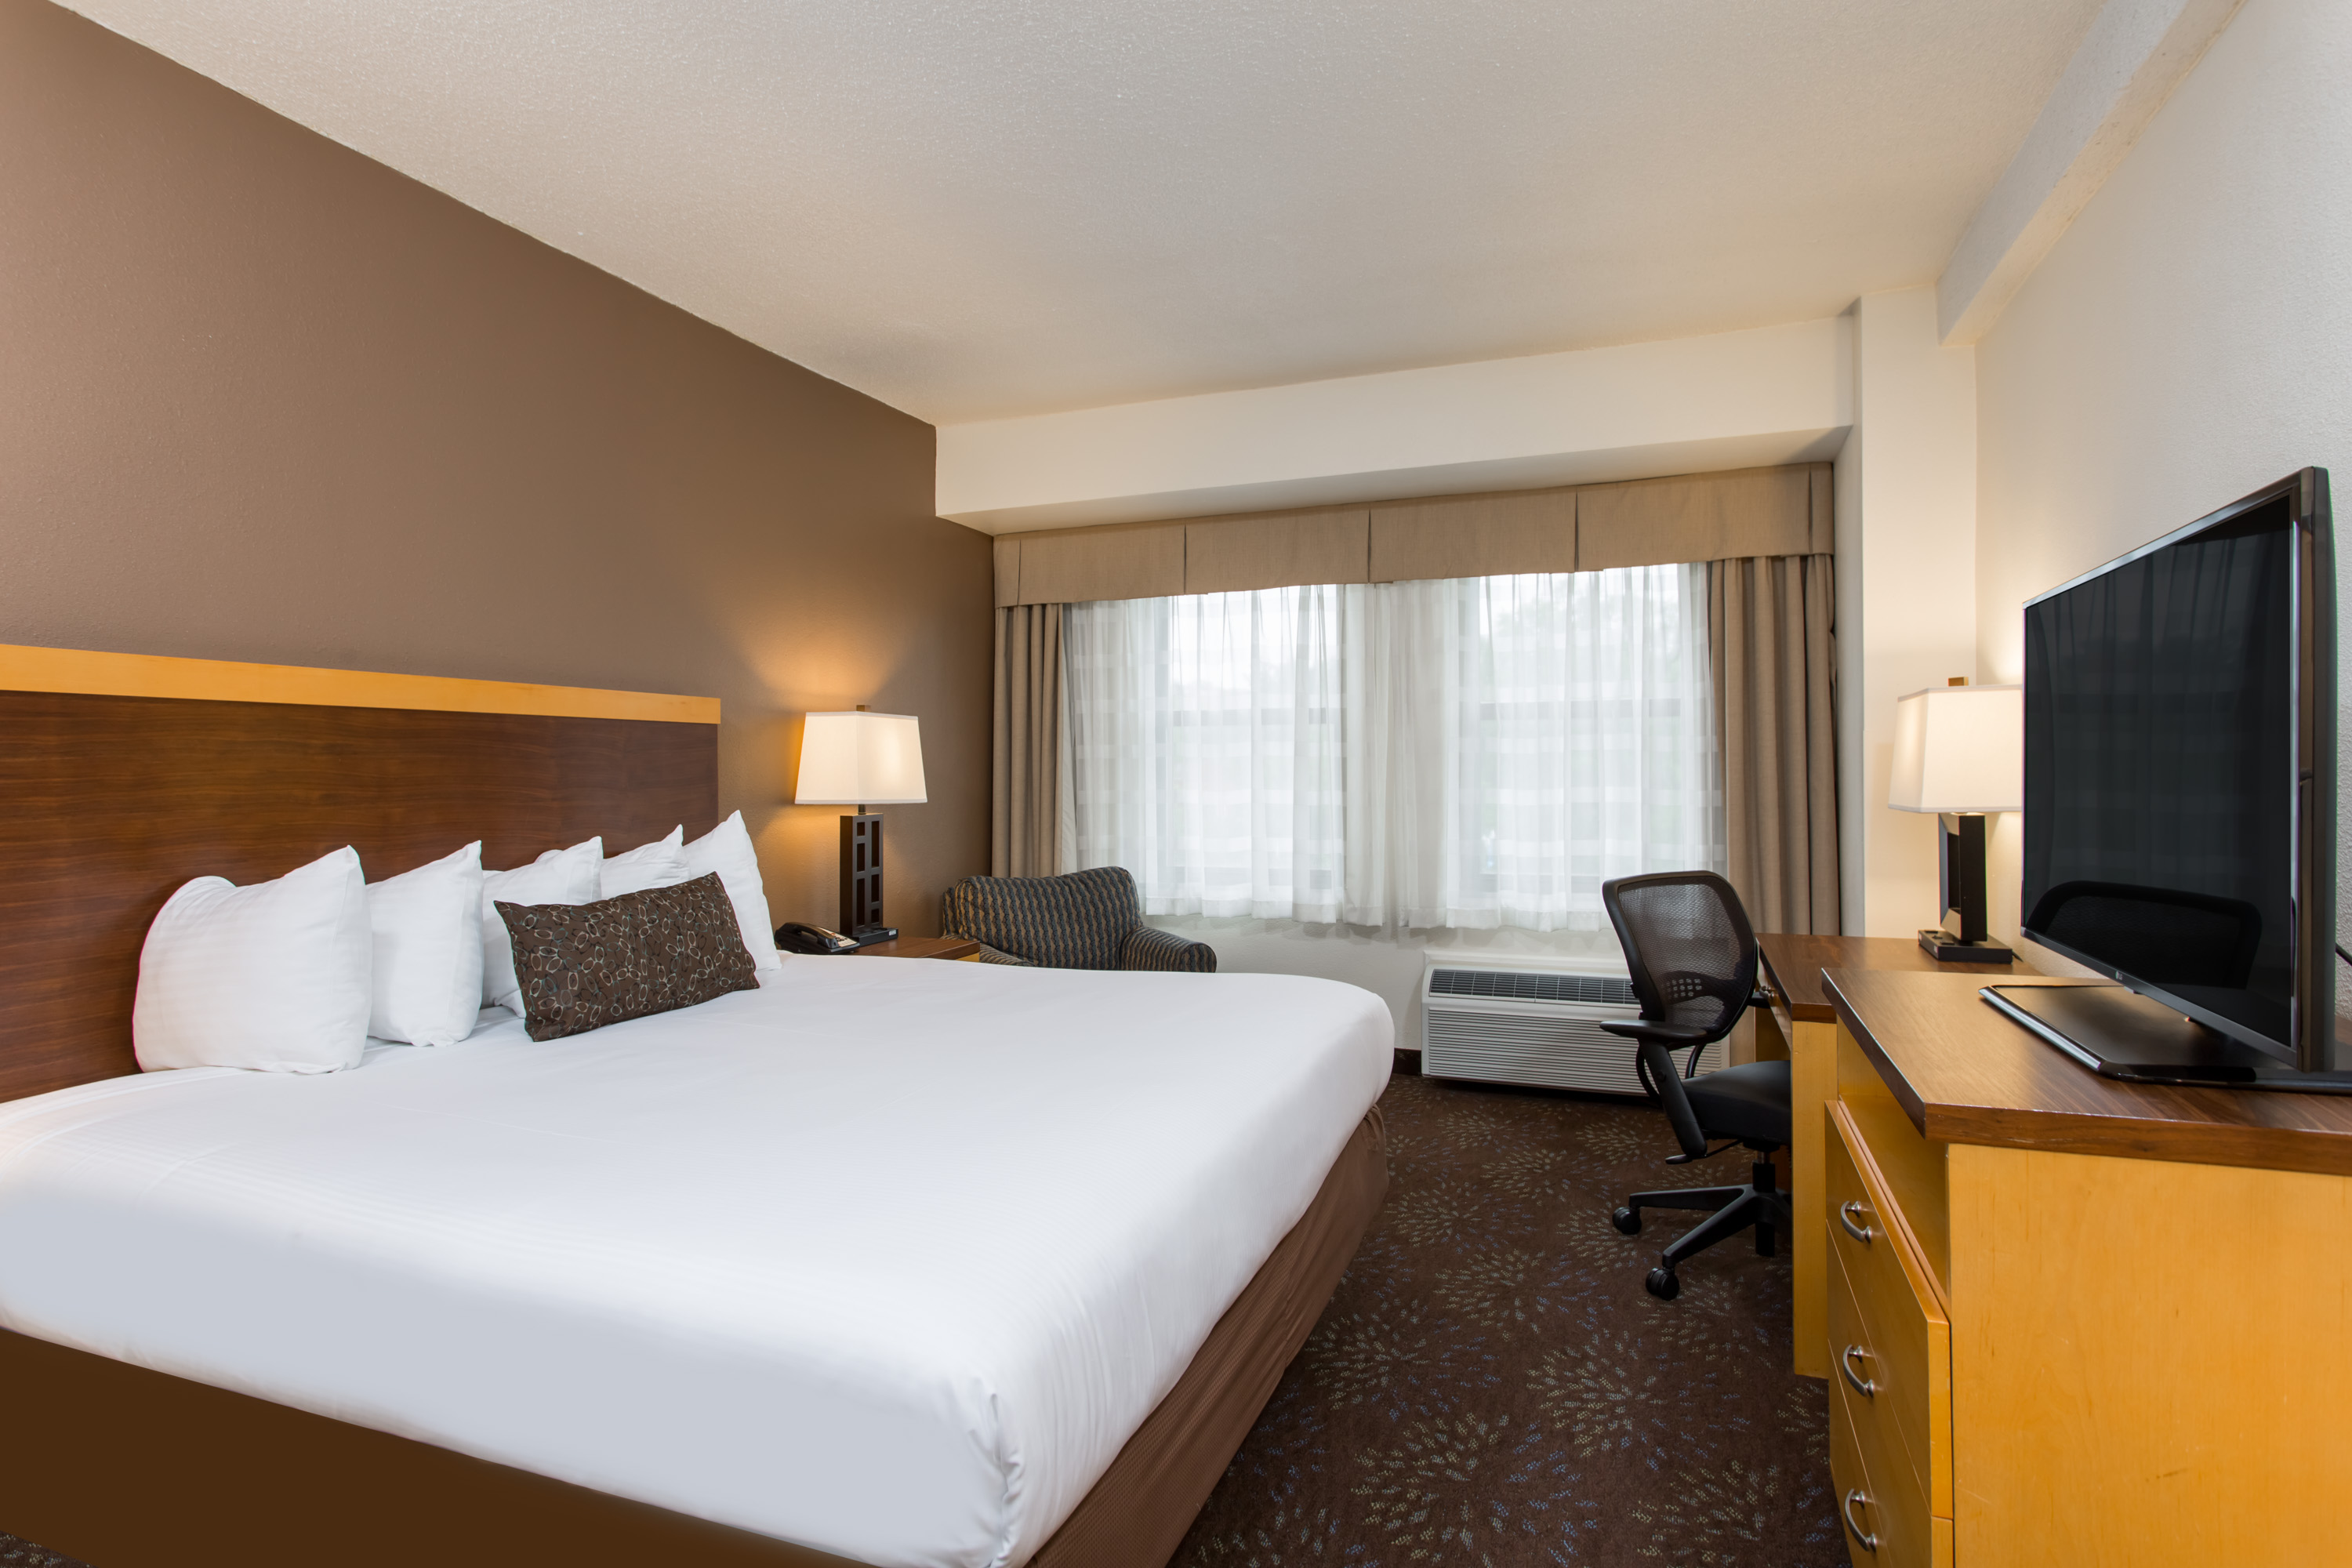 Days Inn by Wyndham Arlington Washington Dc: Unforgettable Stay in the Heart of the Capital